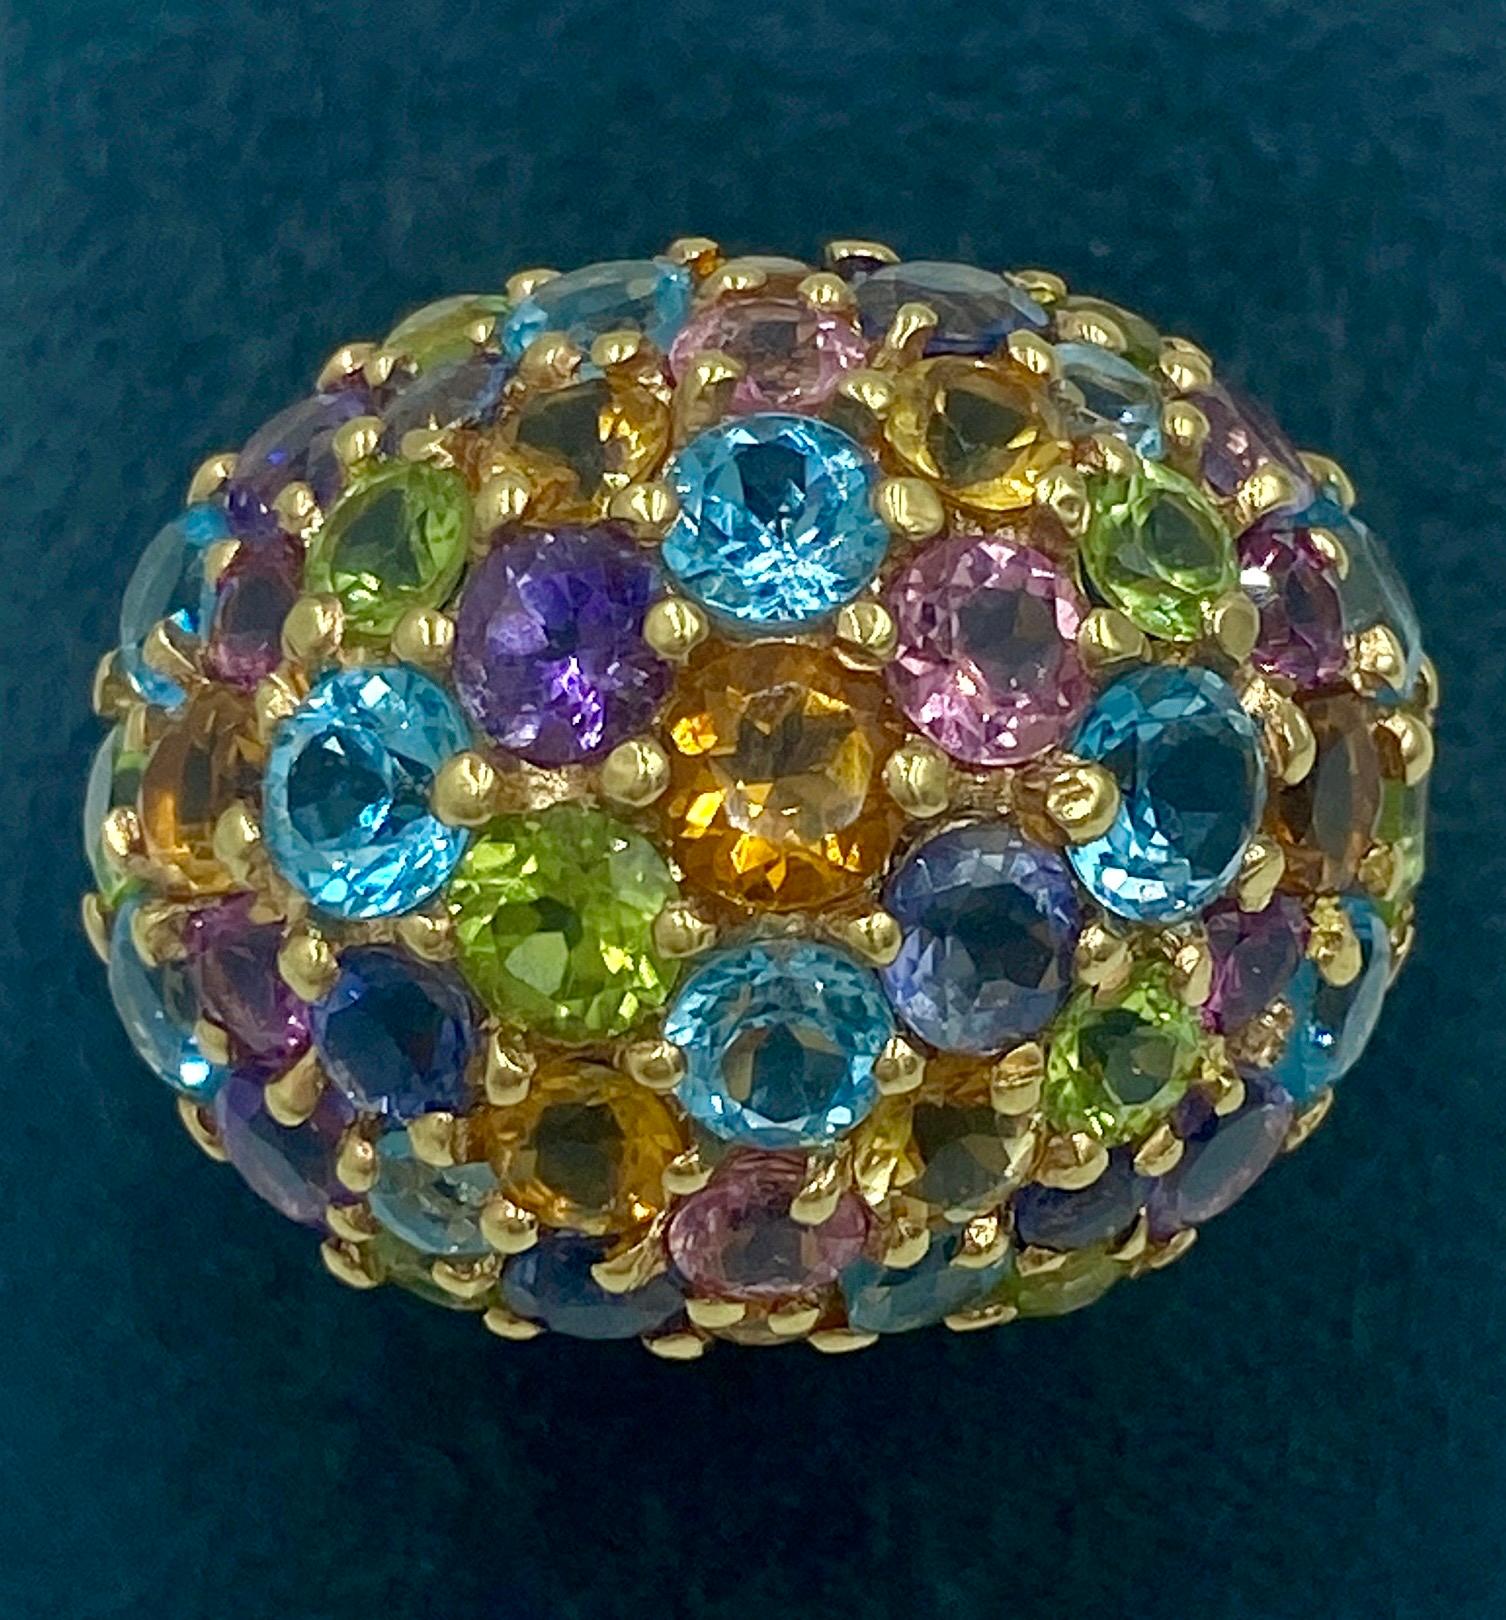 This is a delightful Italian 18 karat pink gold dome ring adorned with an assortment of gemstones including coloured sapphires, aquamarine, amethyst, peridot and  tourmaline. It is beautifully made and the multi coloured stones are a joy to behold.